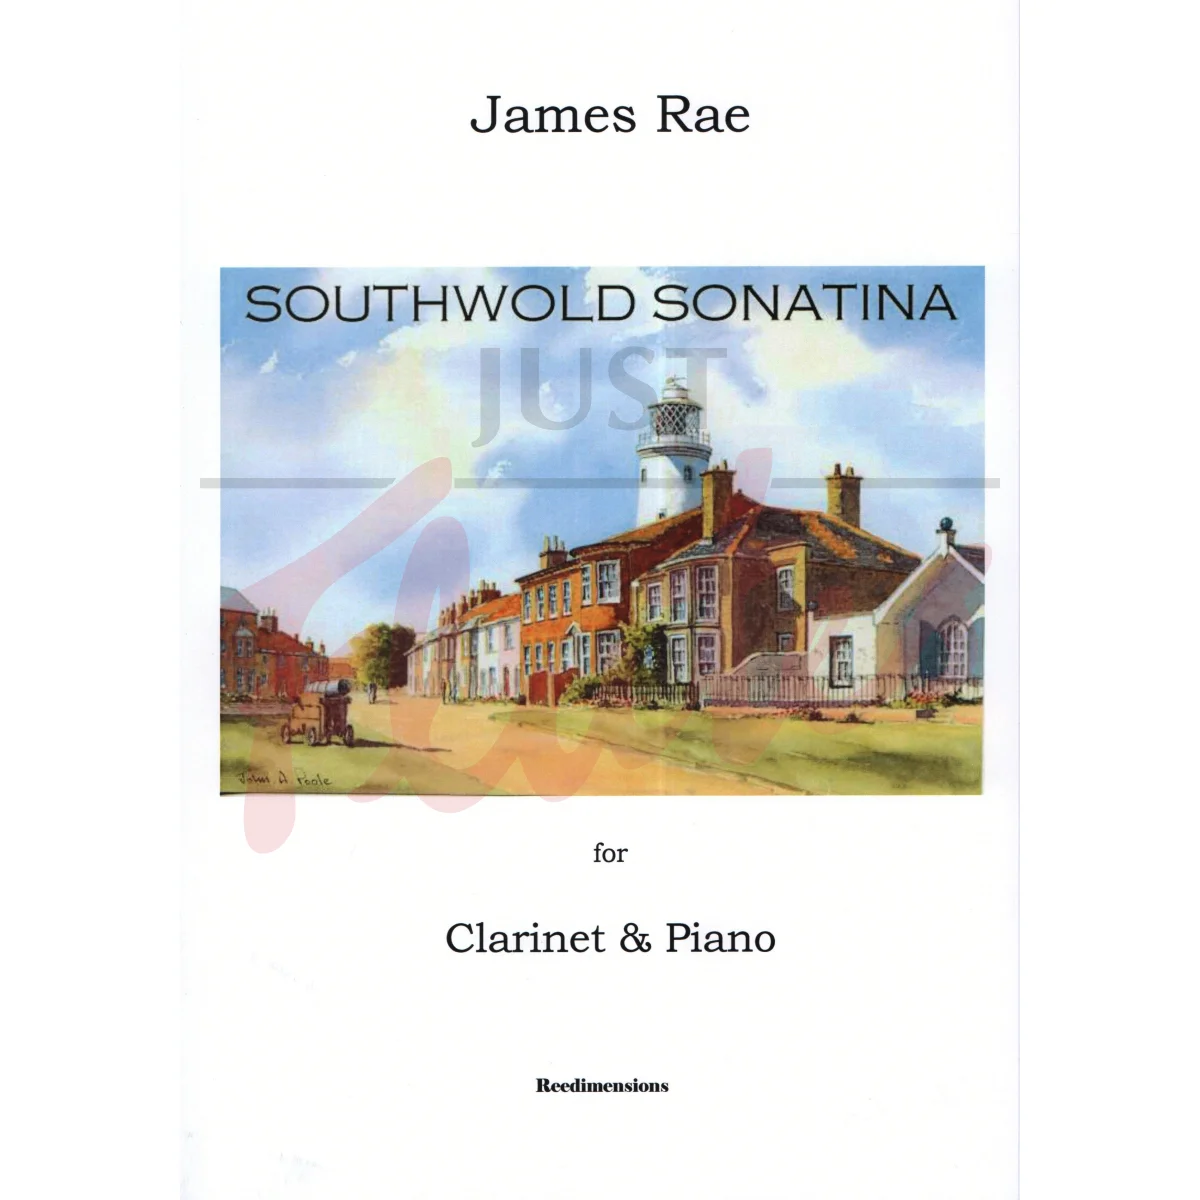 Southwold Sonatina for Clarinet and Piano